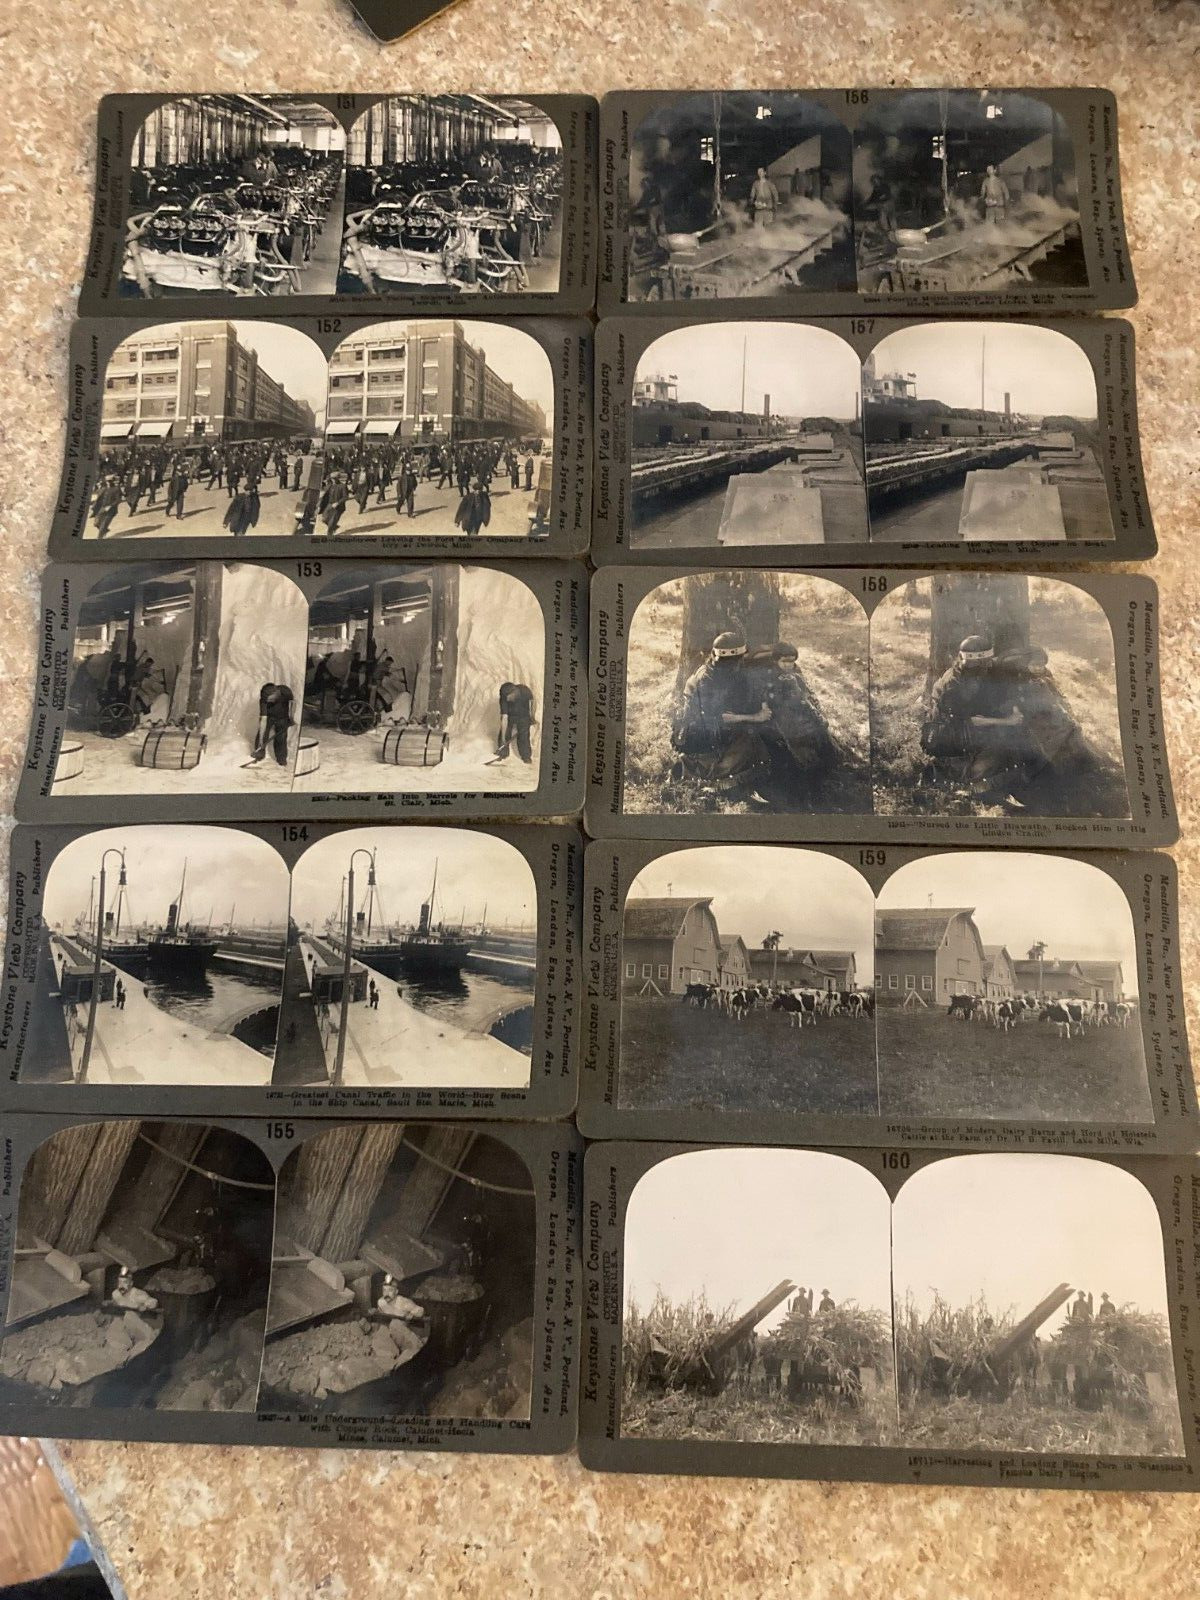 Keystone View Company - 25 consecutive stereoview cards, 151 to 175